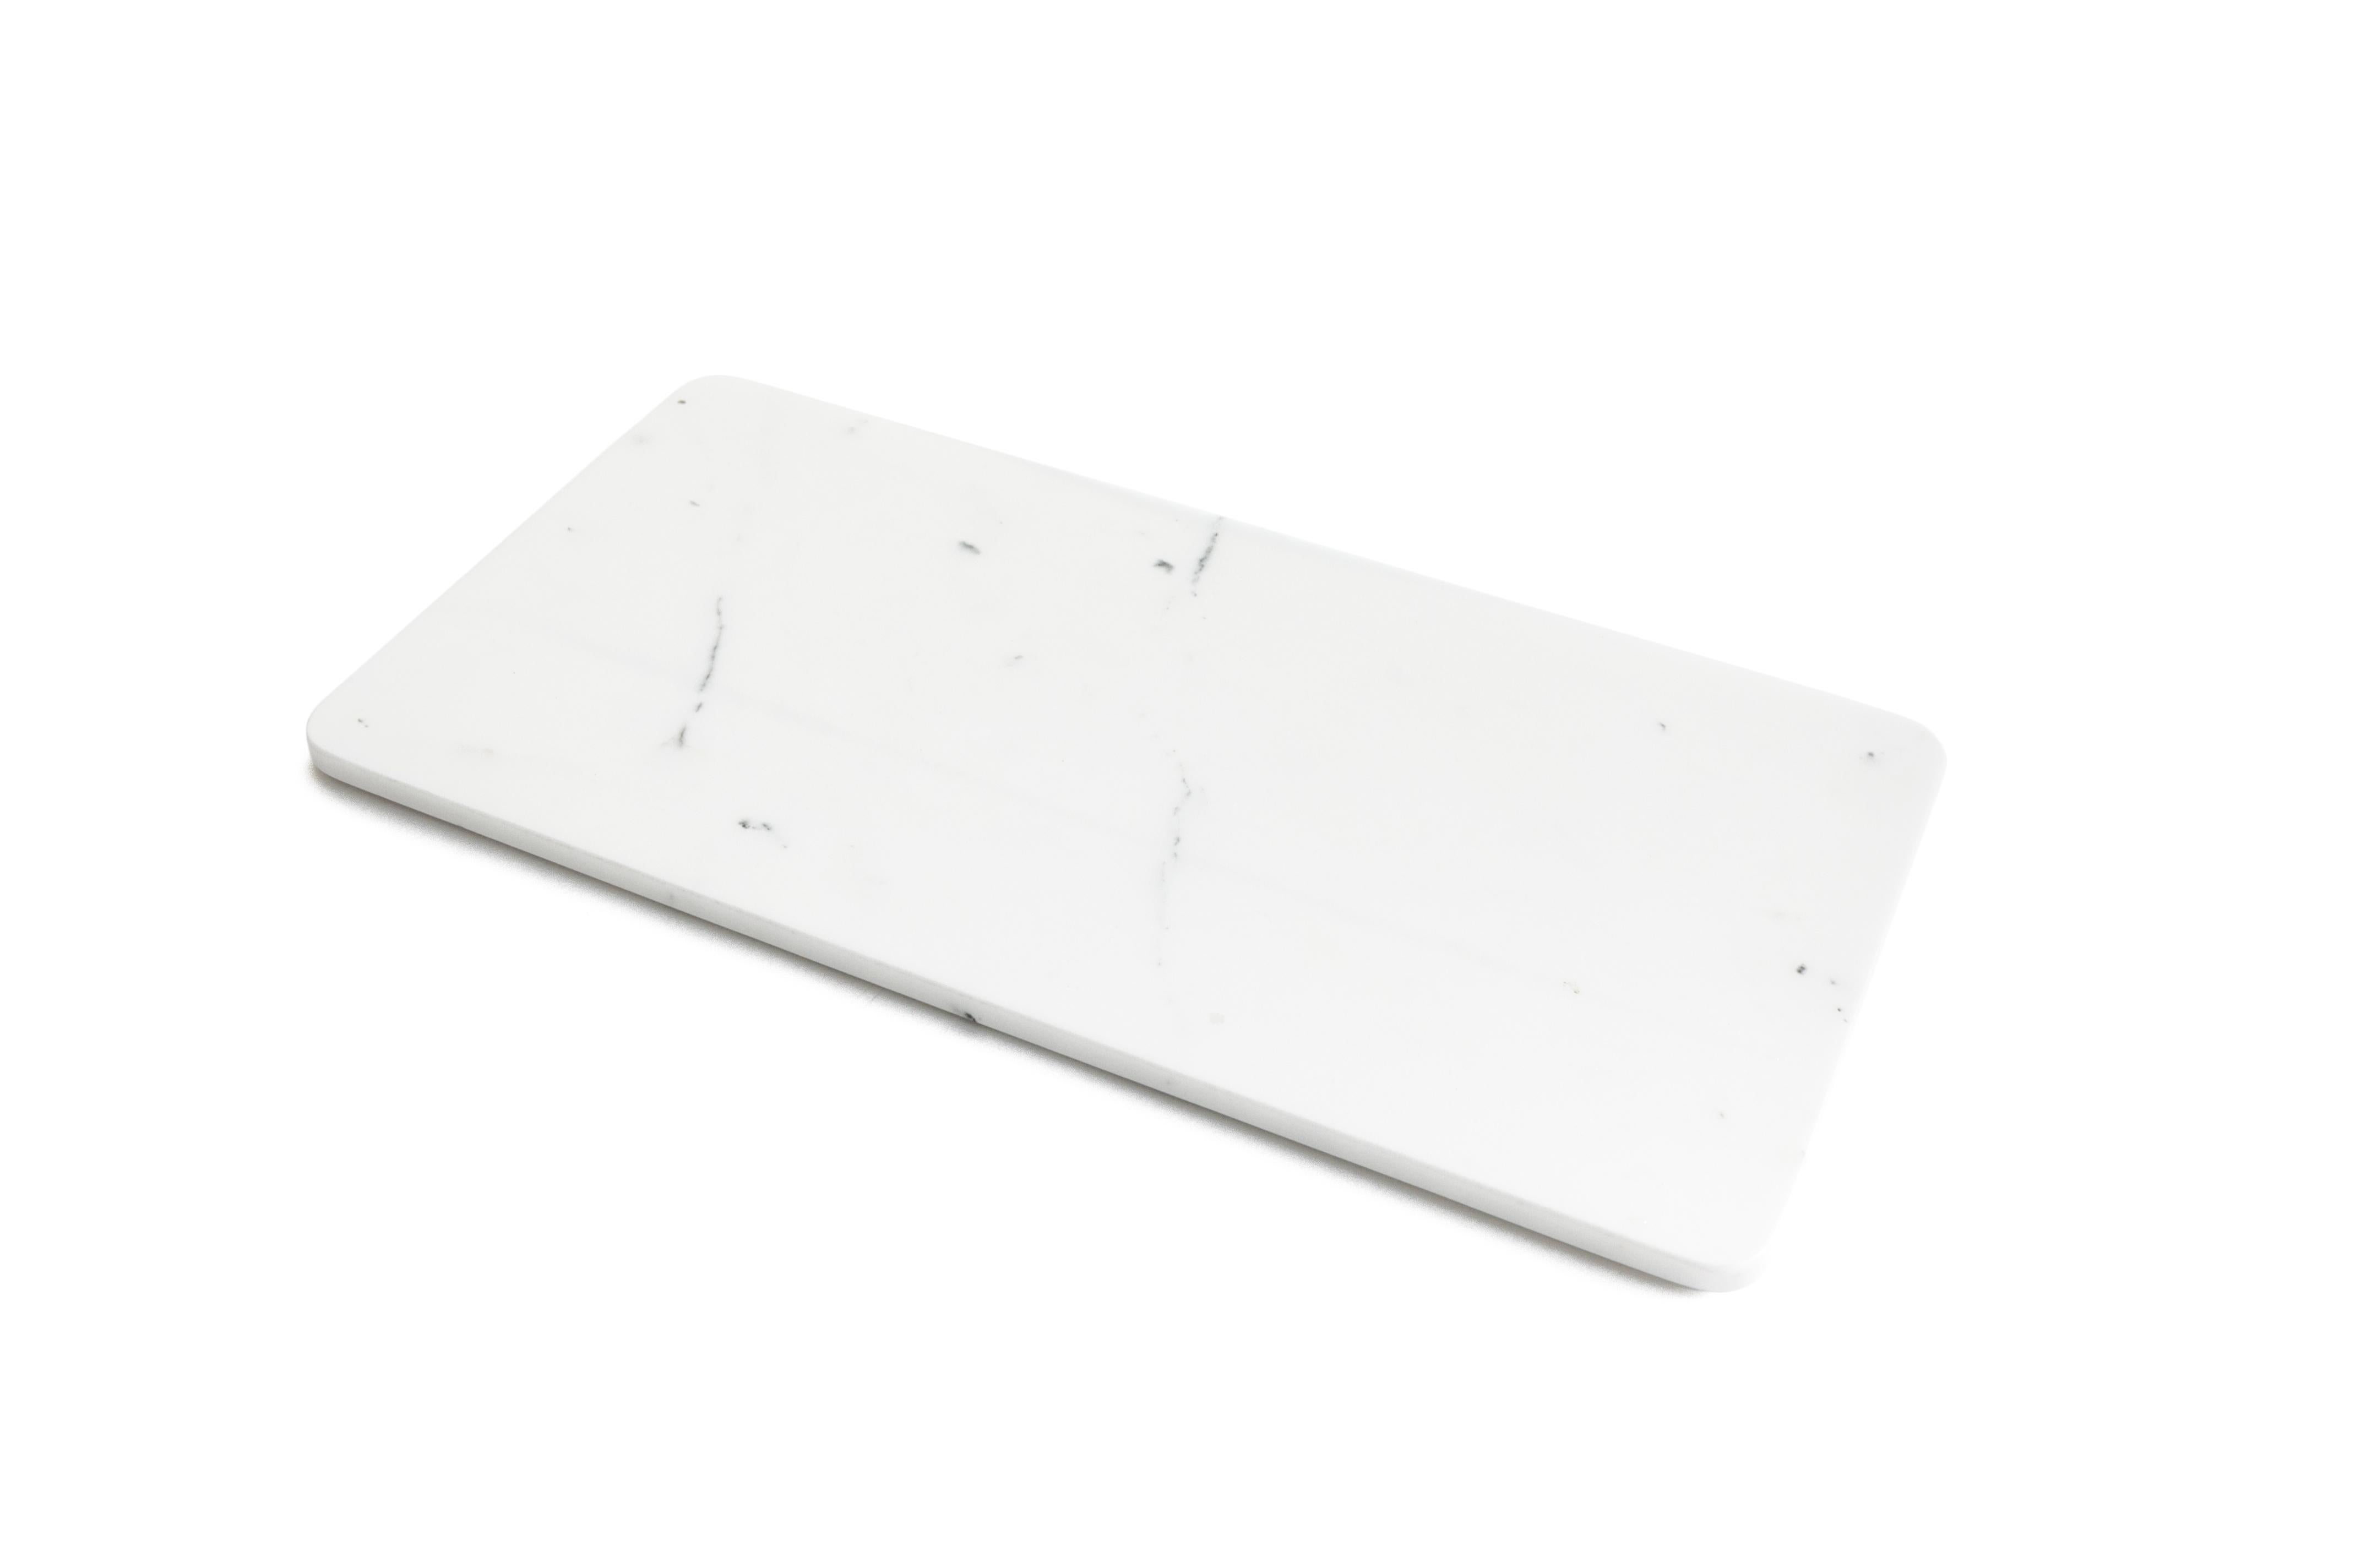 Italian Canapè or Cheese Plate in White Carrara Polished Marble